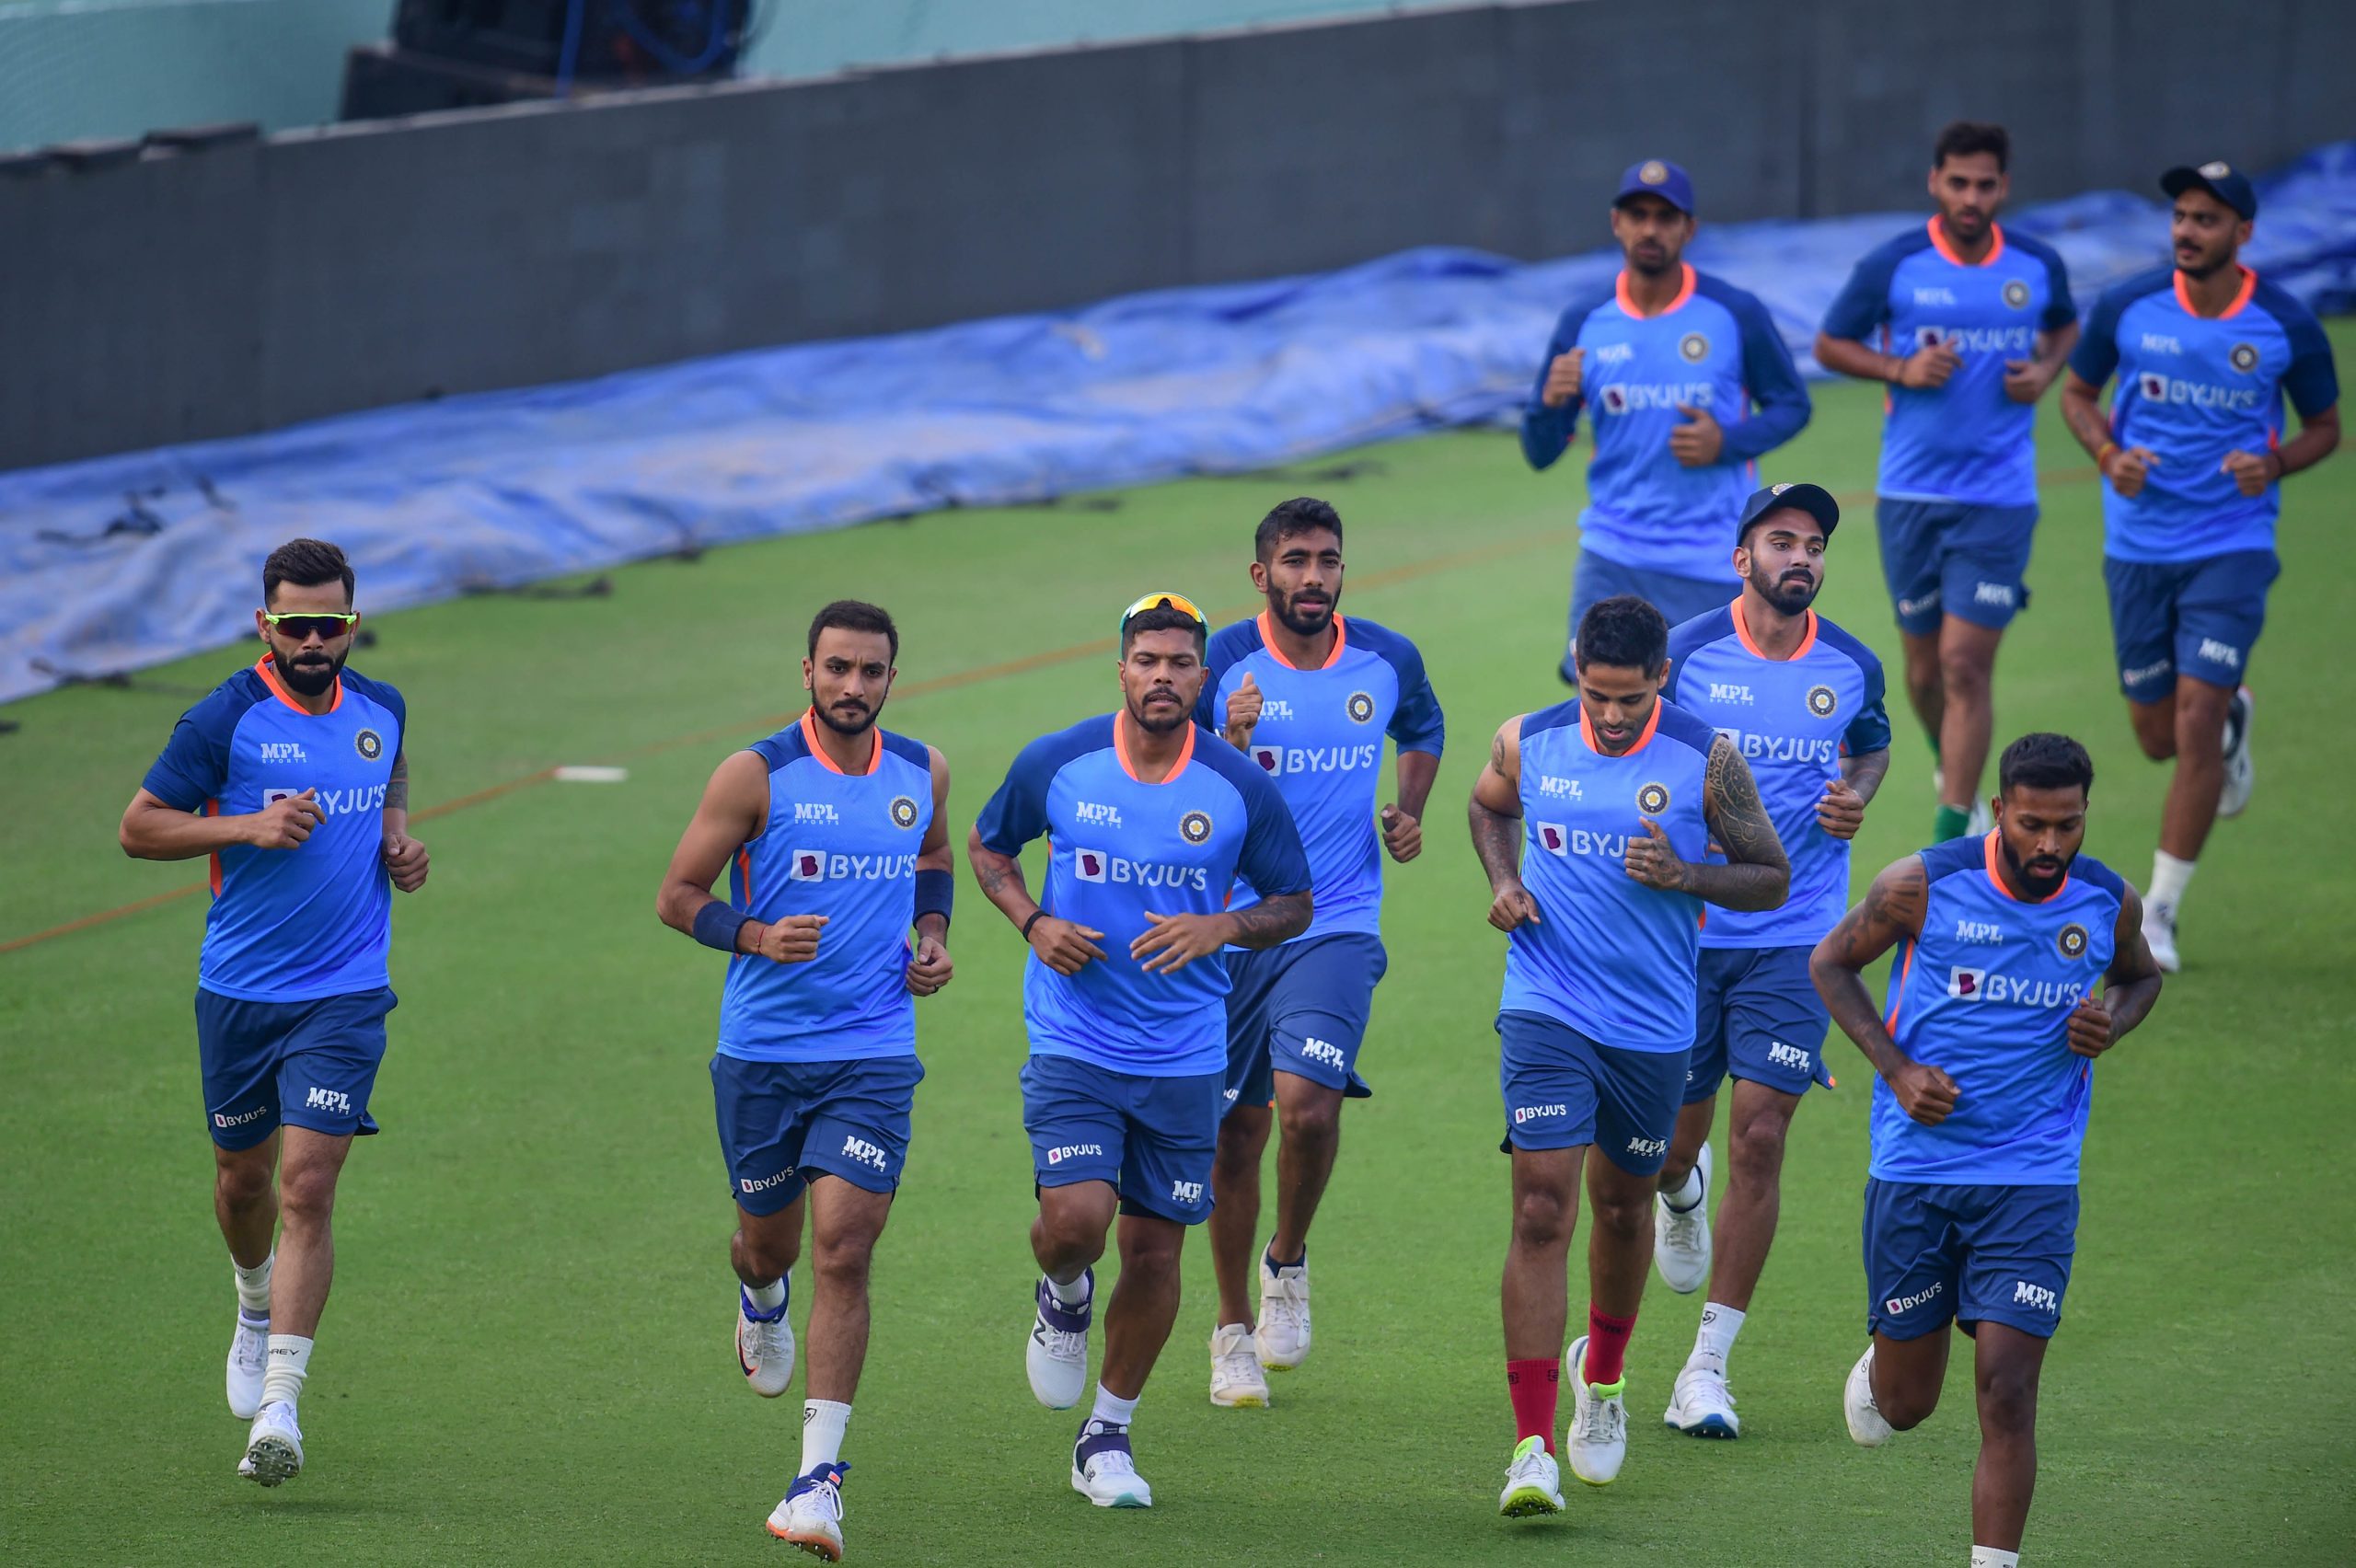 India vs Australia T20I series: 3 players who need to perform well